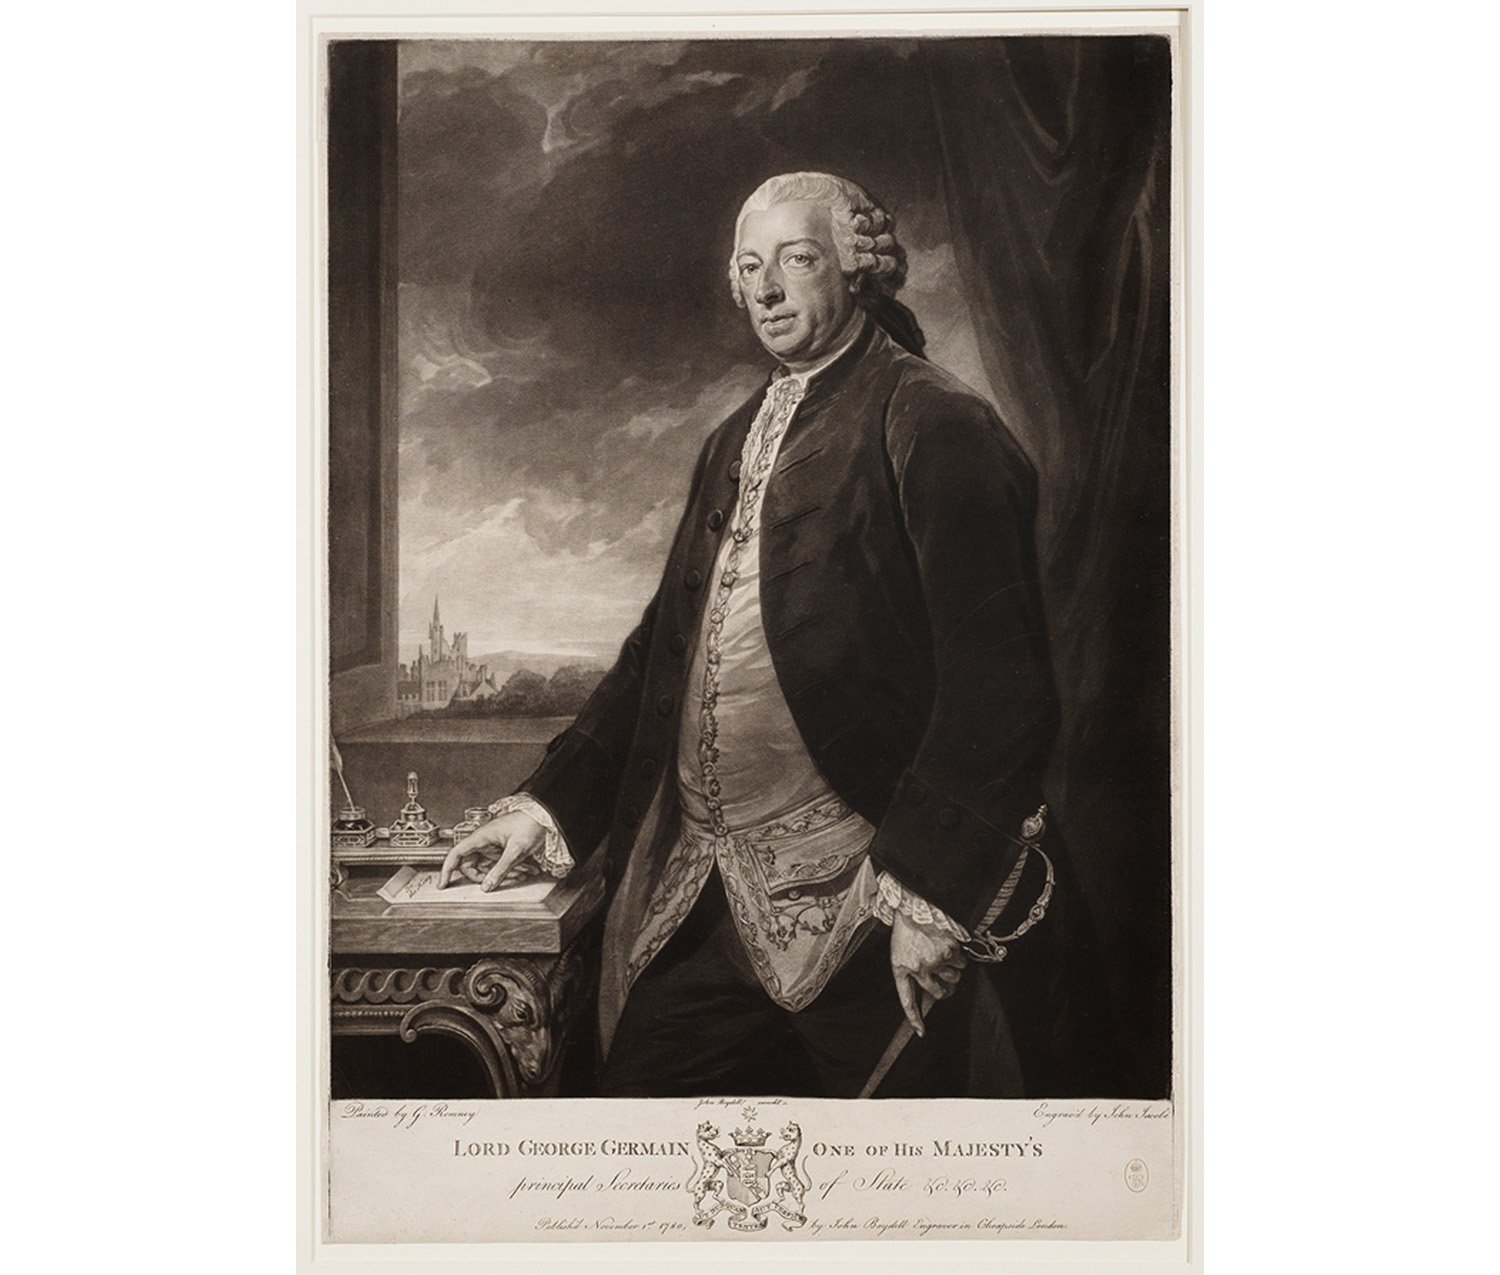 Portrait; 3/4 view of body and 3/4 facial profile; man wearing curled wig tied back; in fancy dress; noblility; holding a sword in right hand and pointing to a letter with the left; desk with decorated moldings; view of landscape and large ubilding through window behind the standing figure; curtain on the left of the figure